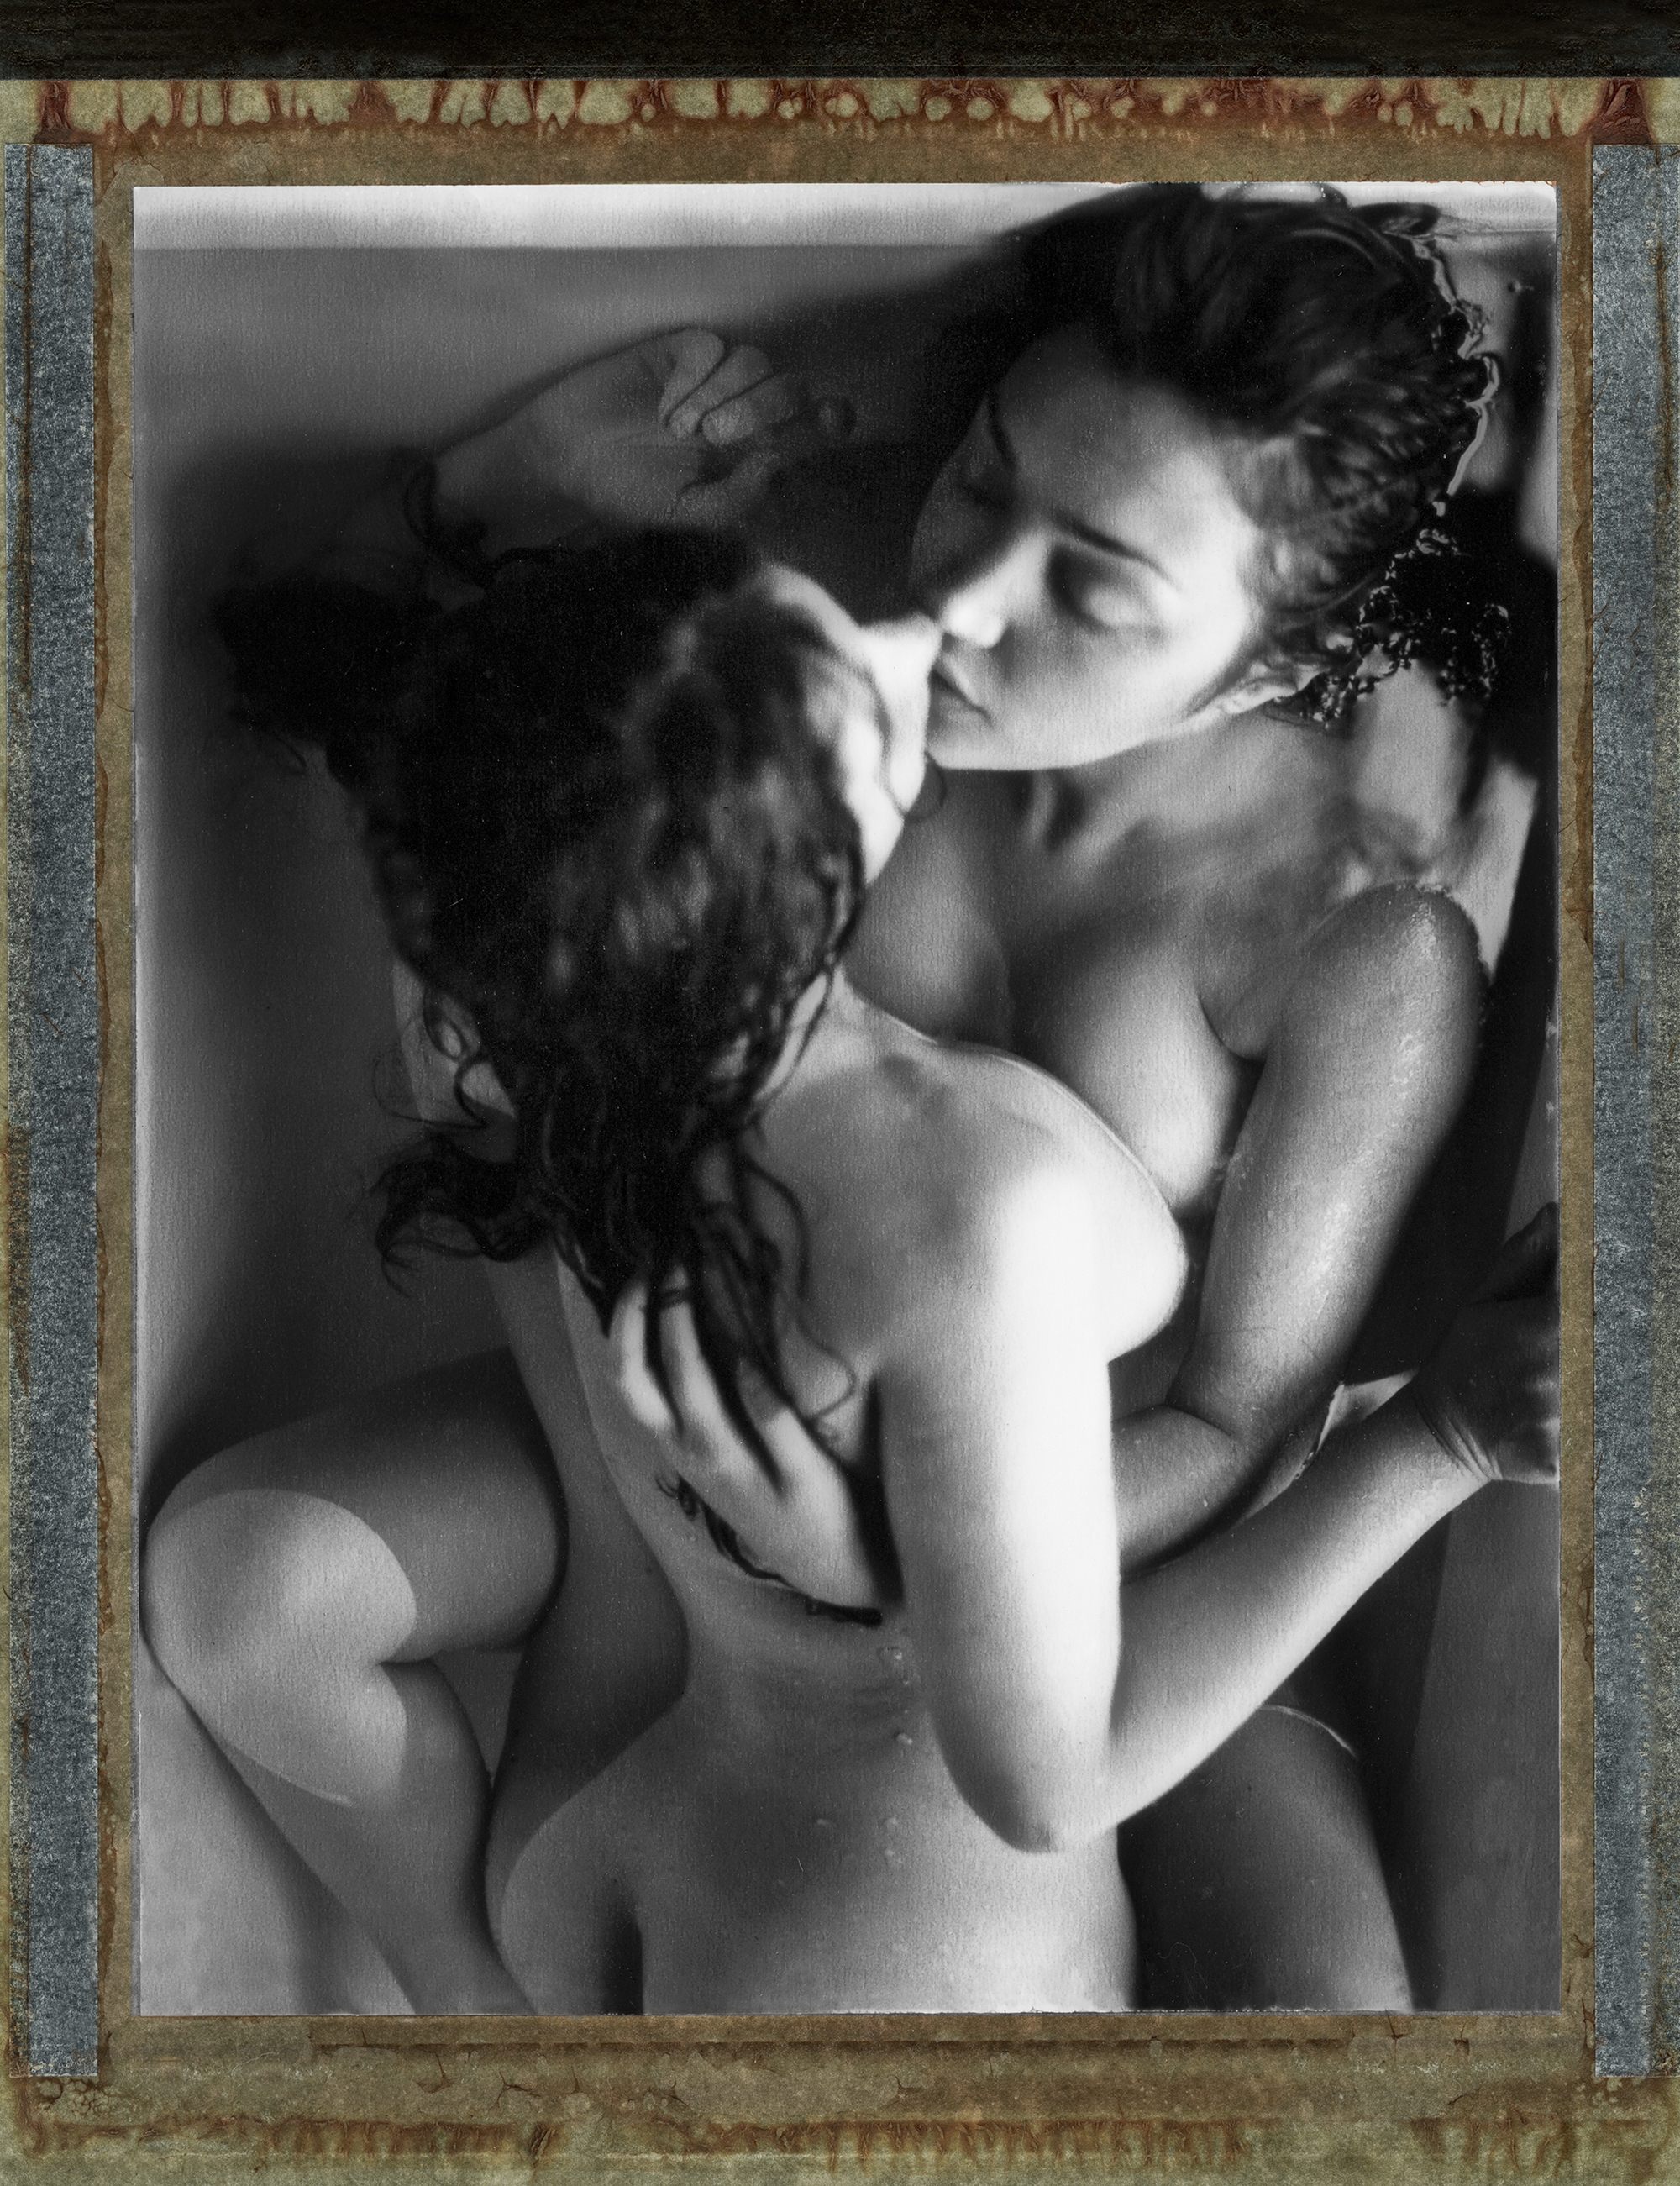 two women lie naked in the bath embracing and kissing